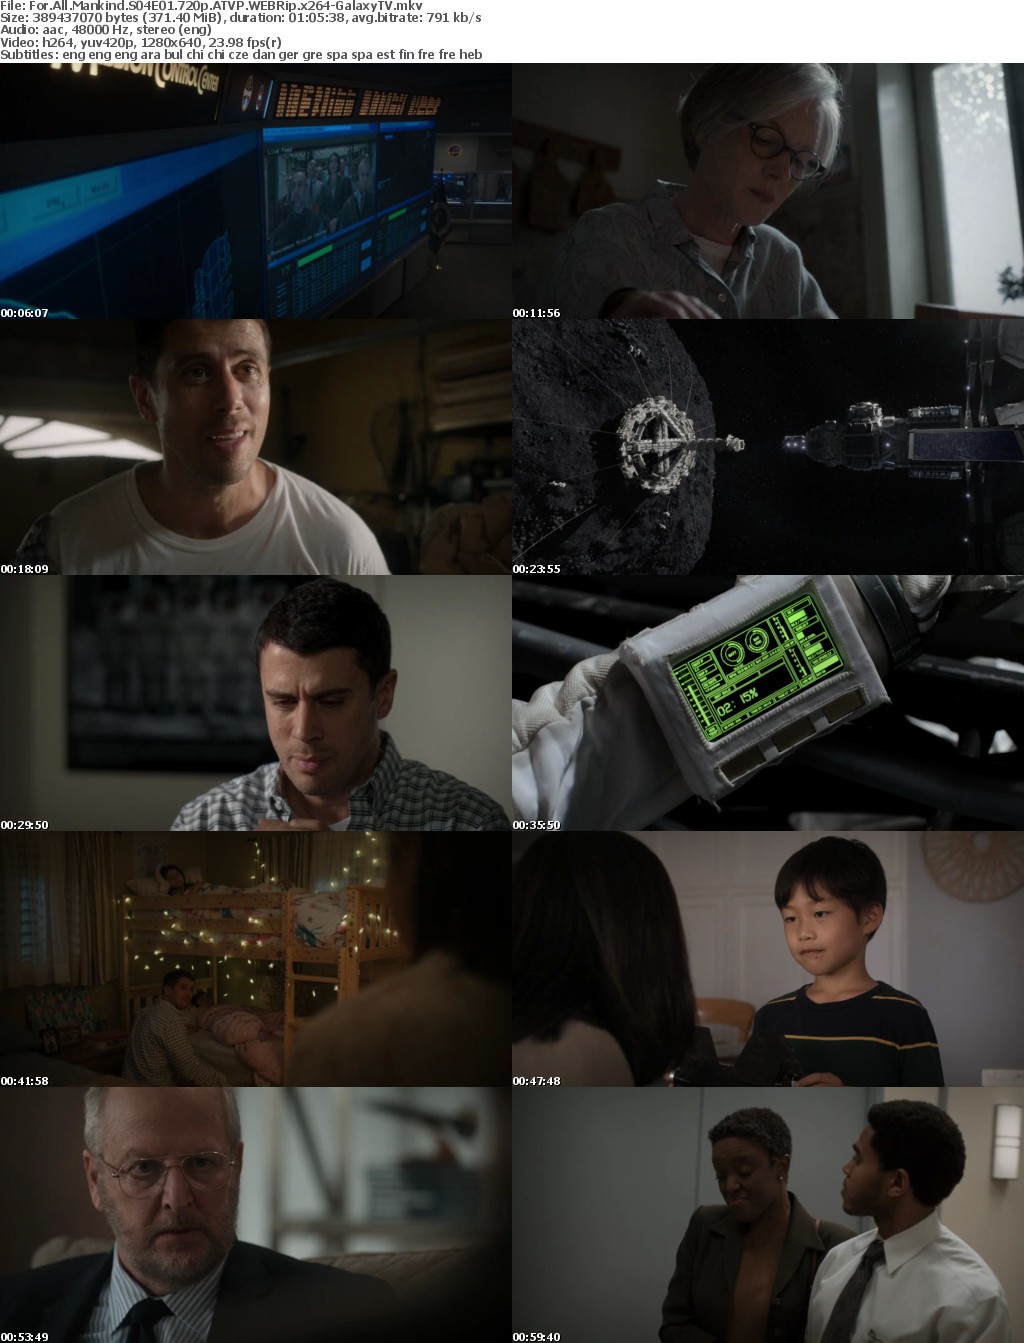 For All Mankind S04 COMPLETE 720p ATVP WEBRip x264-GalaxyTV